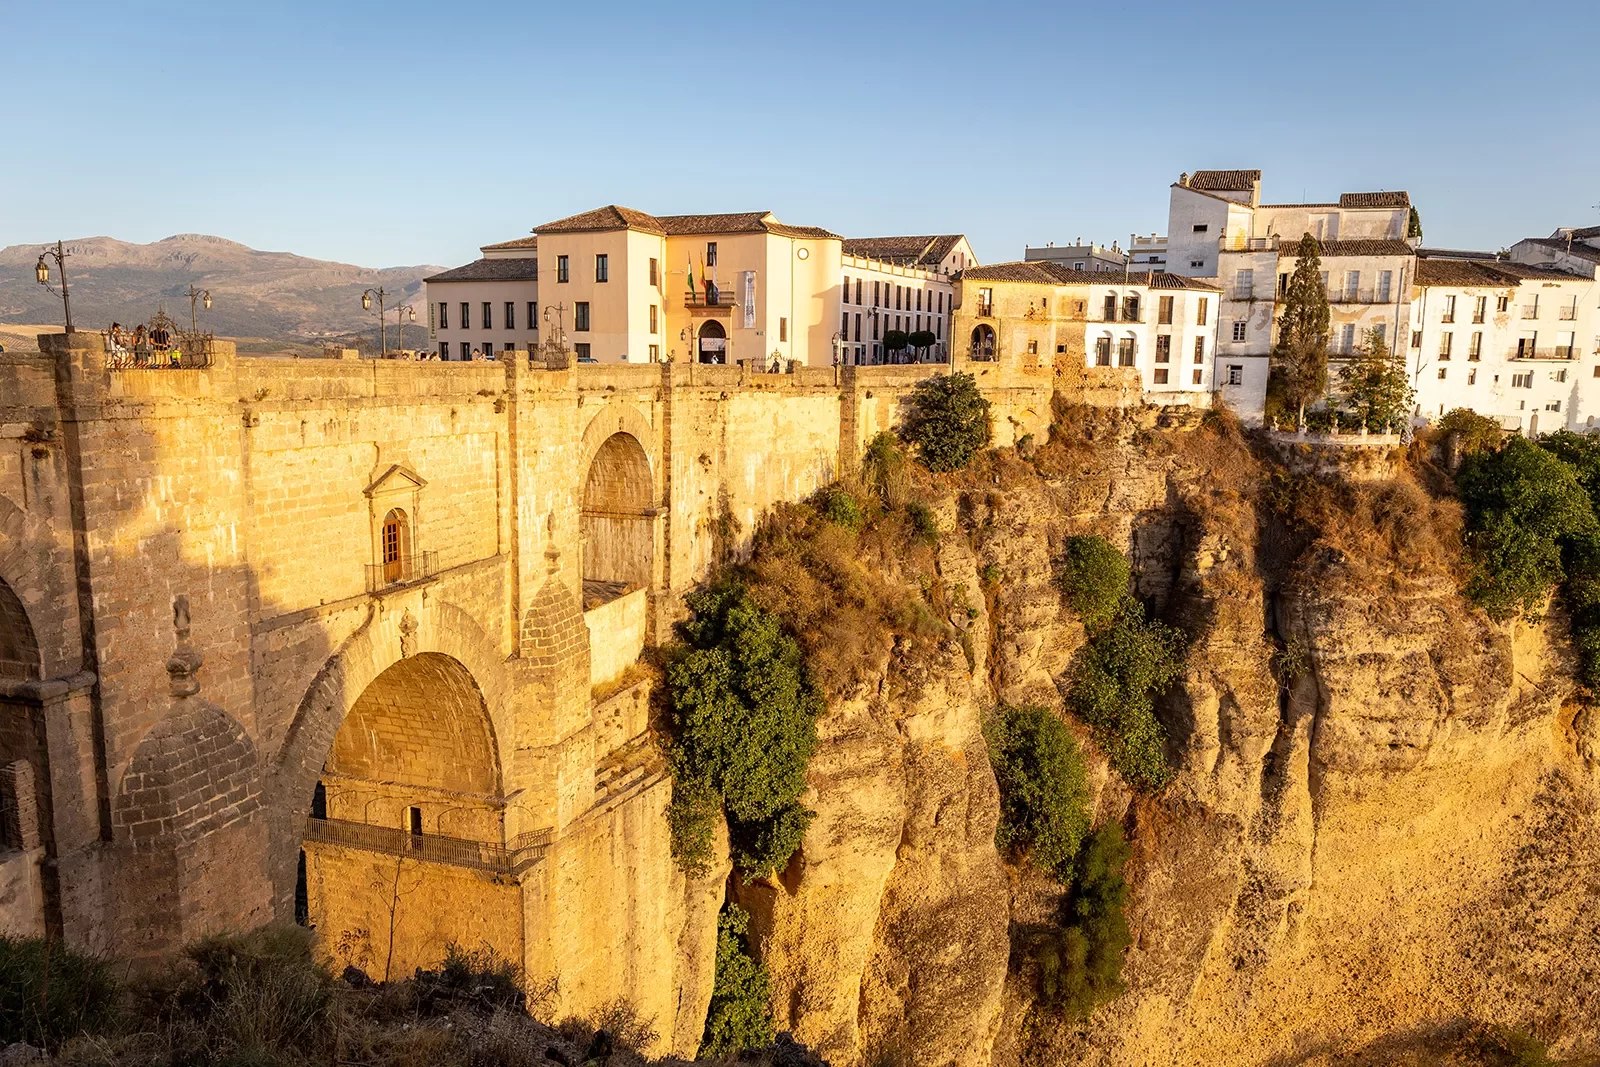 Spanish buildings on top of a cliff with dramatic drop.